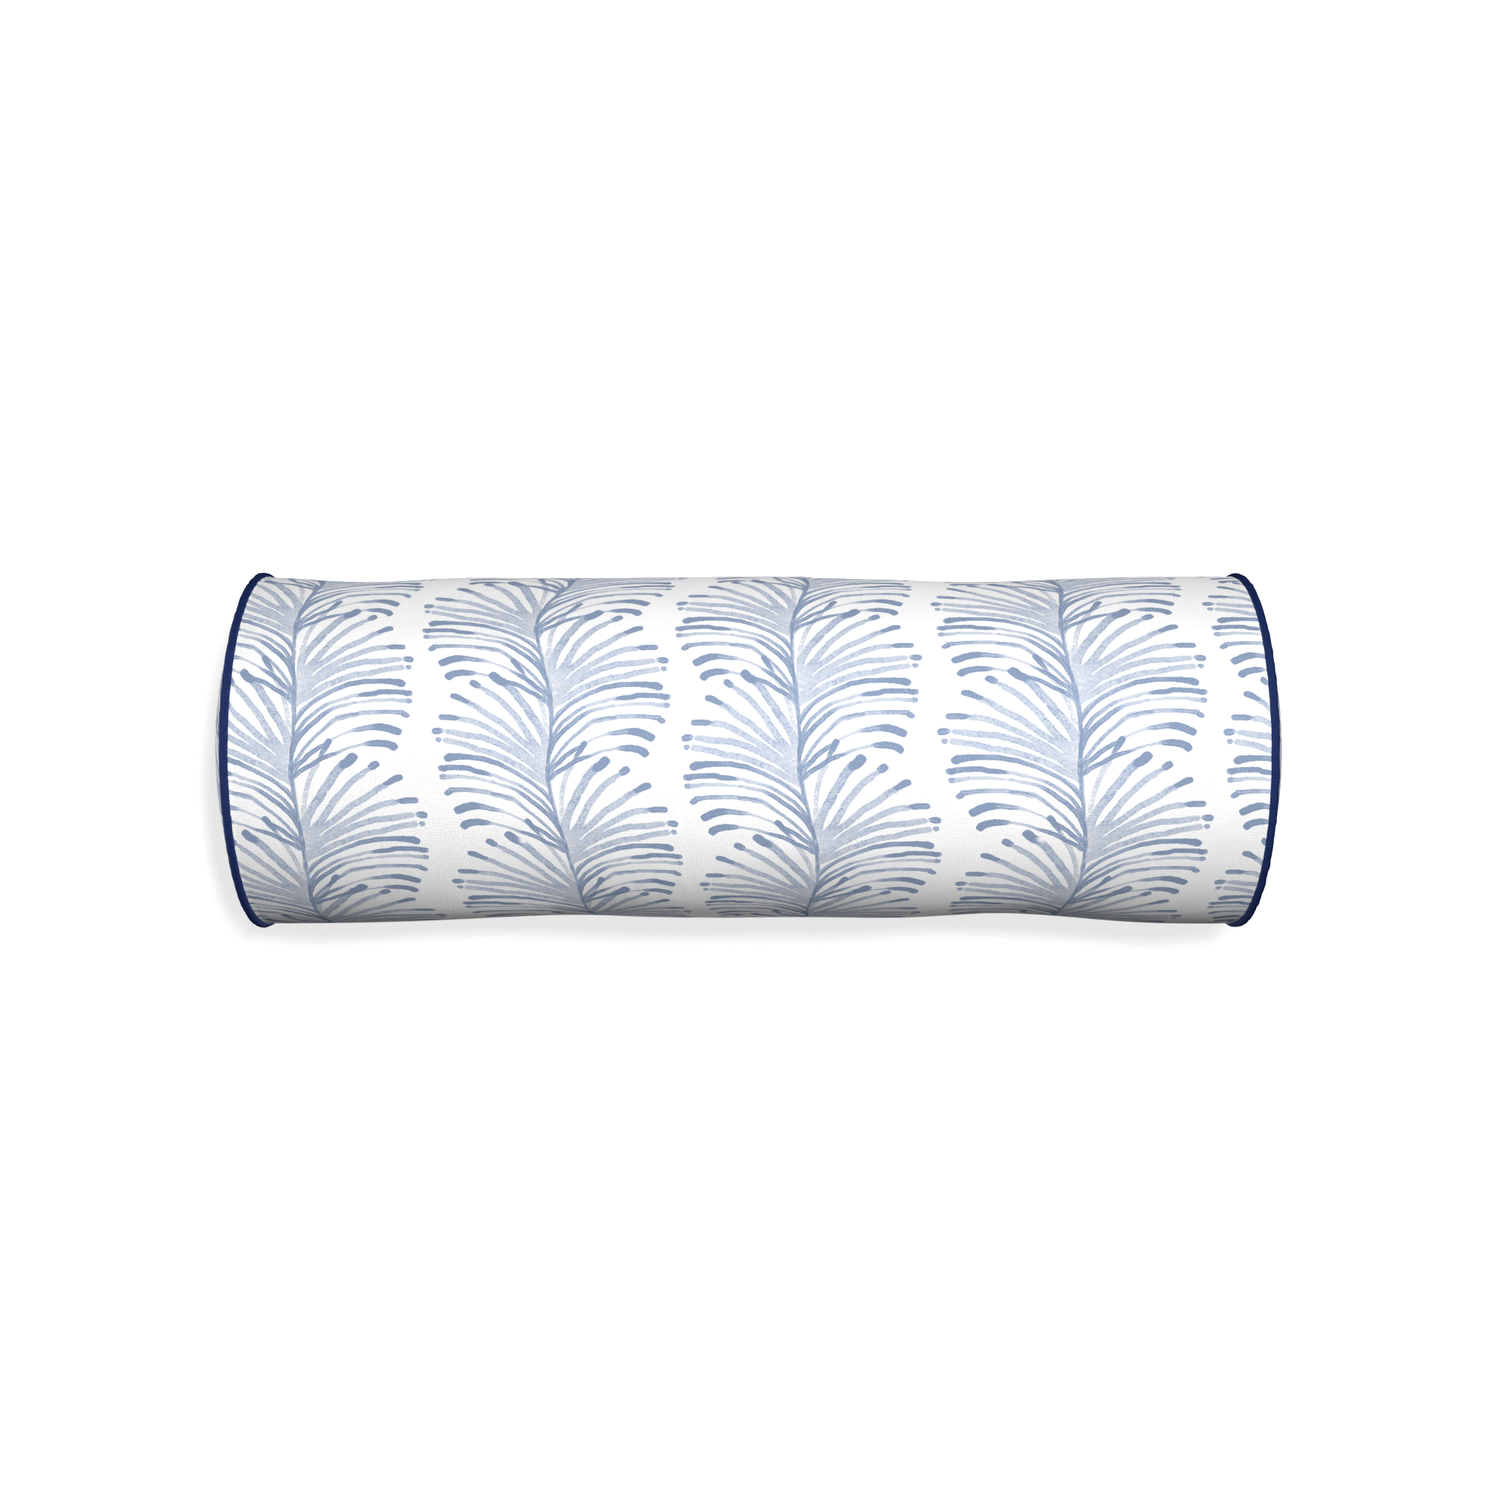 Bolster emma sky custom sky blue botanical stripepillow with midnight piping on white background